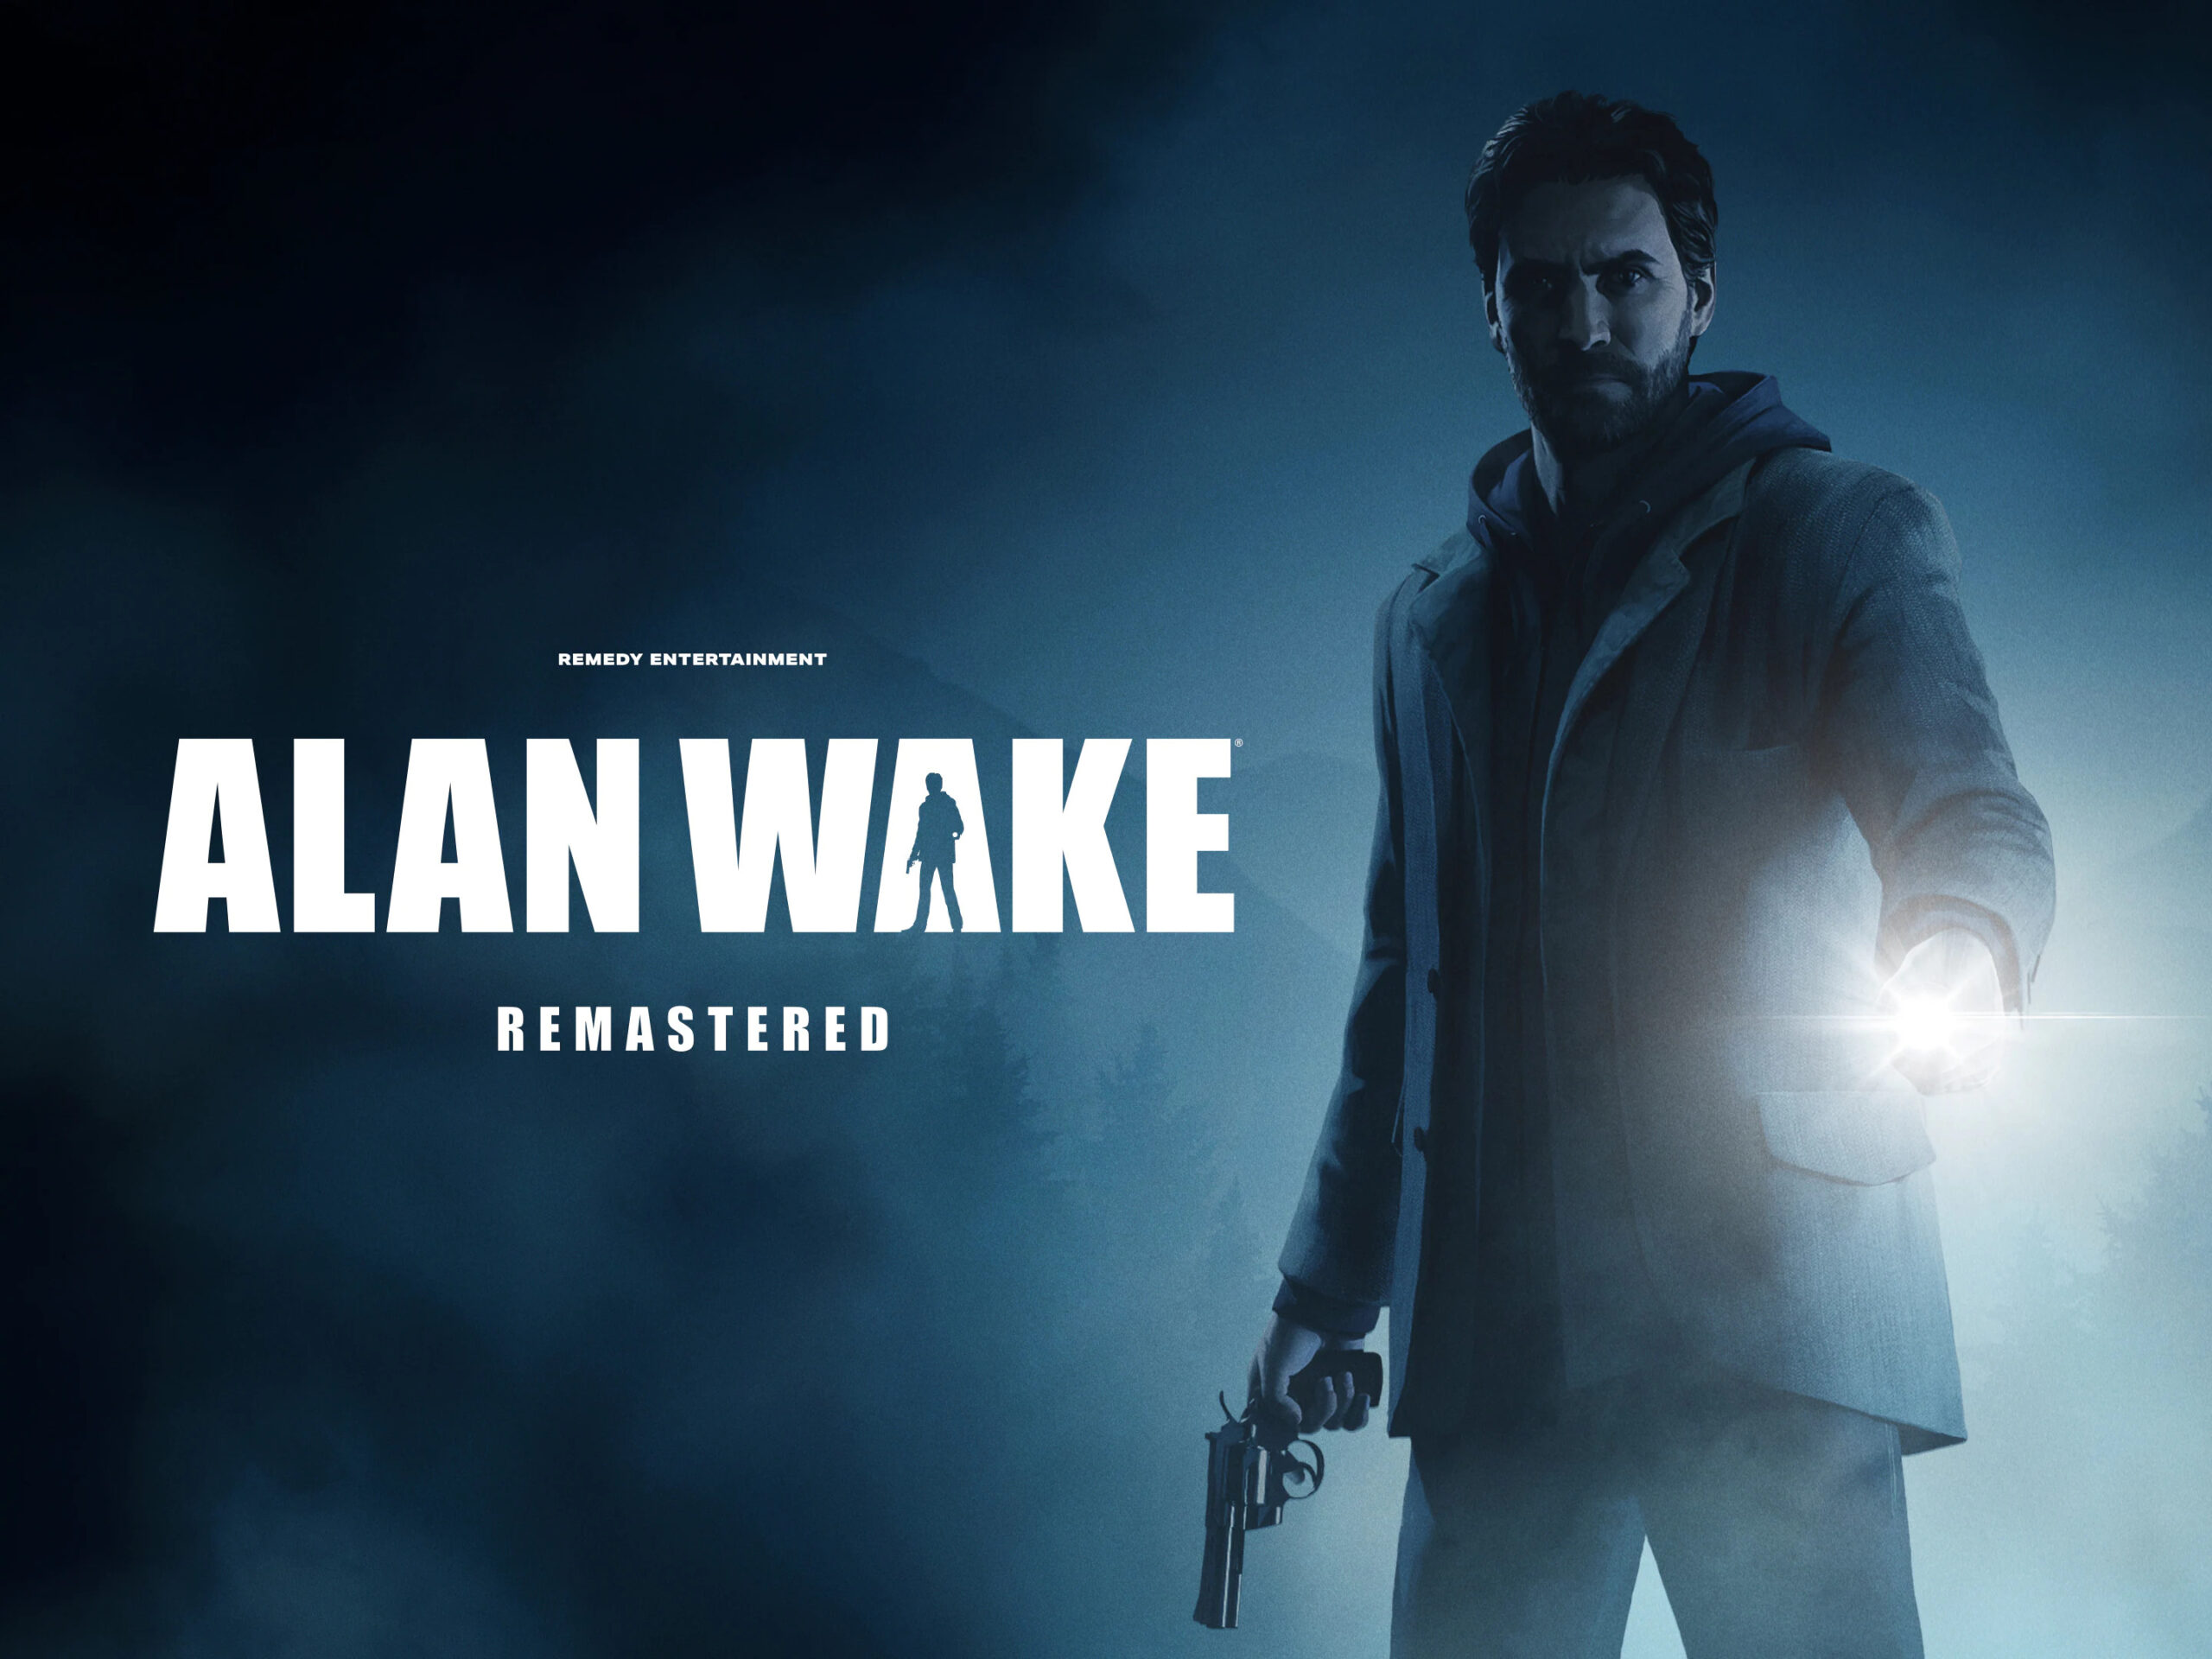 The reason why Alan Wake 2 doesn't have a physical version - Meristation